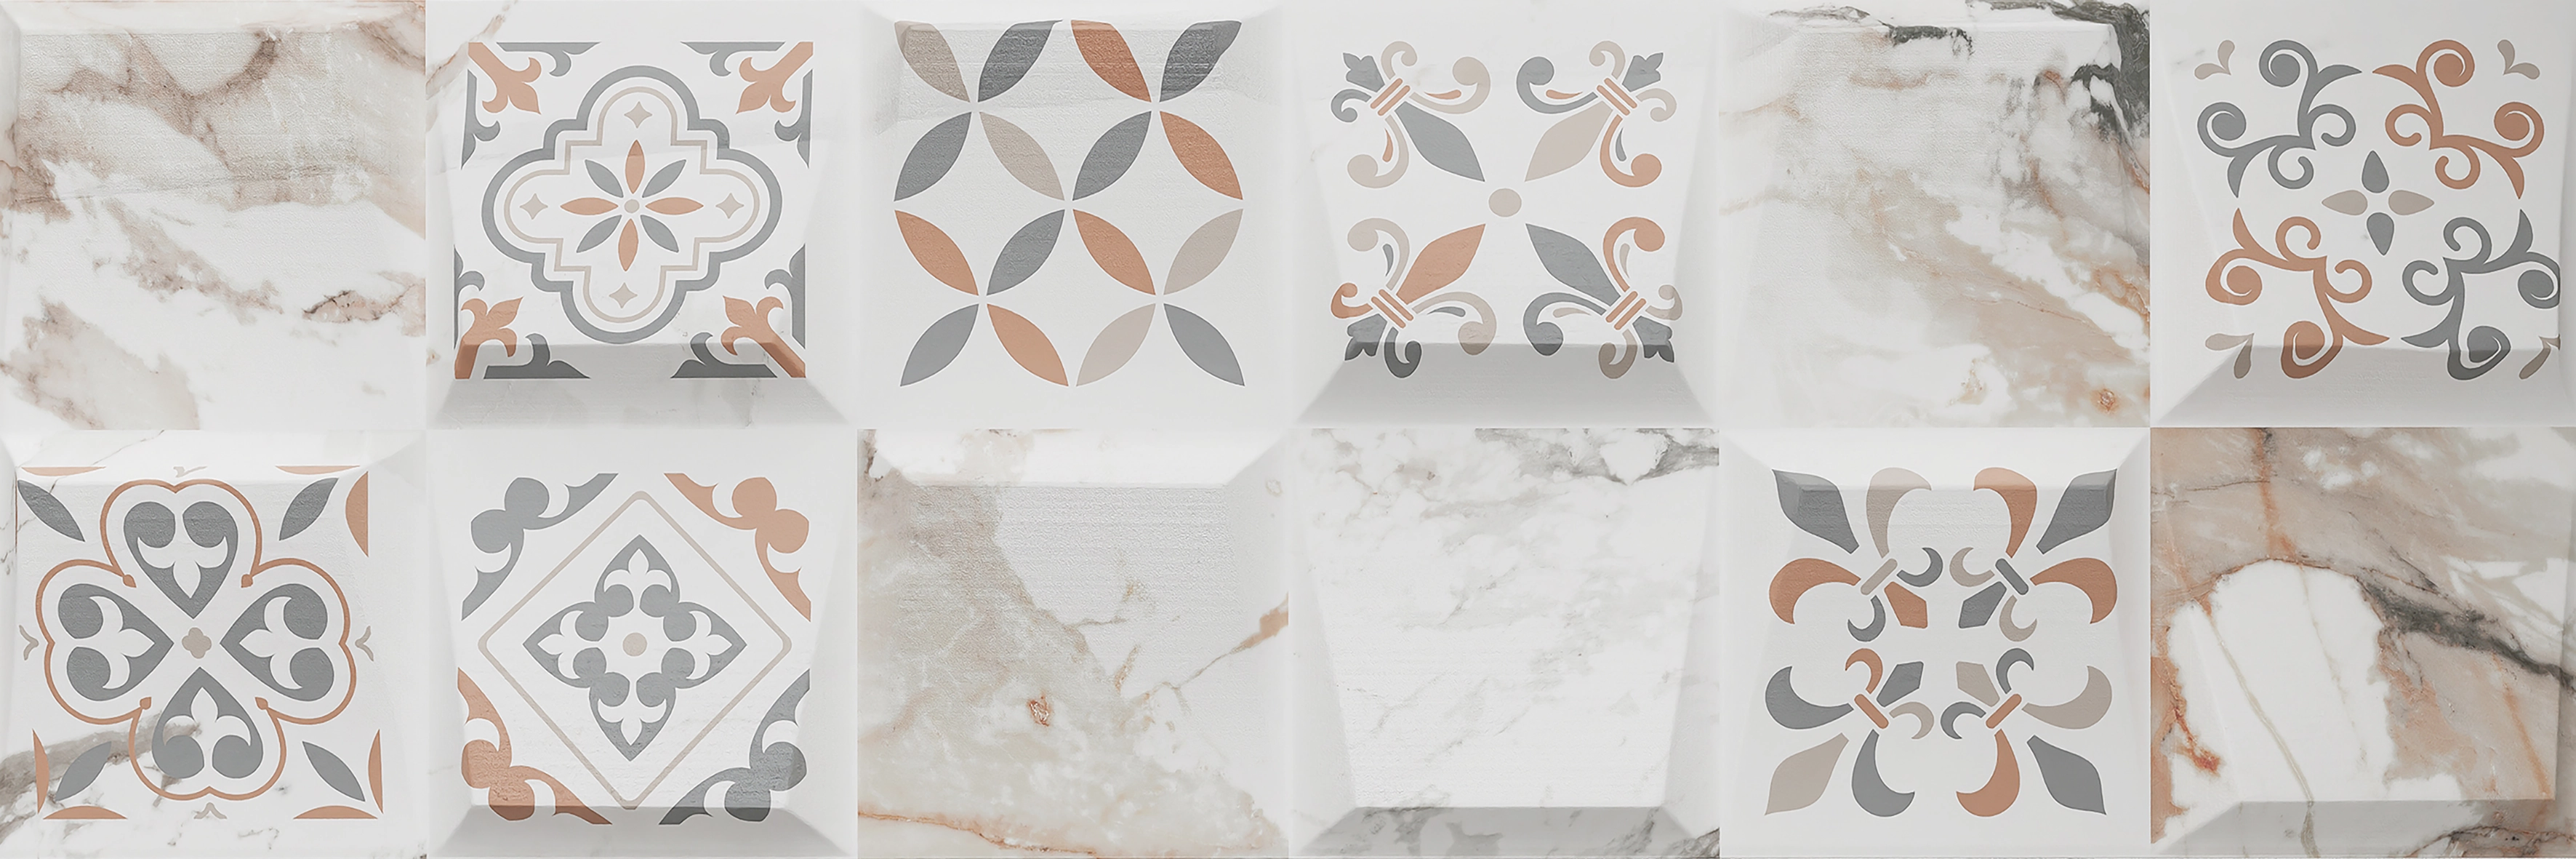 Falcon: Striking Ceramic Tile for Walls and Floors